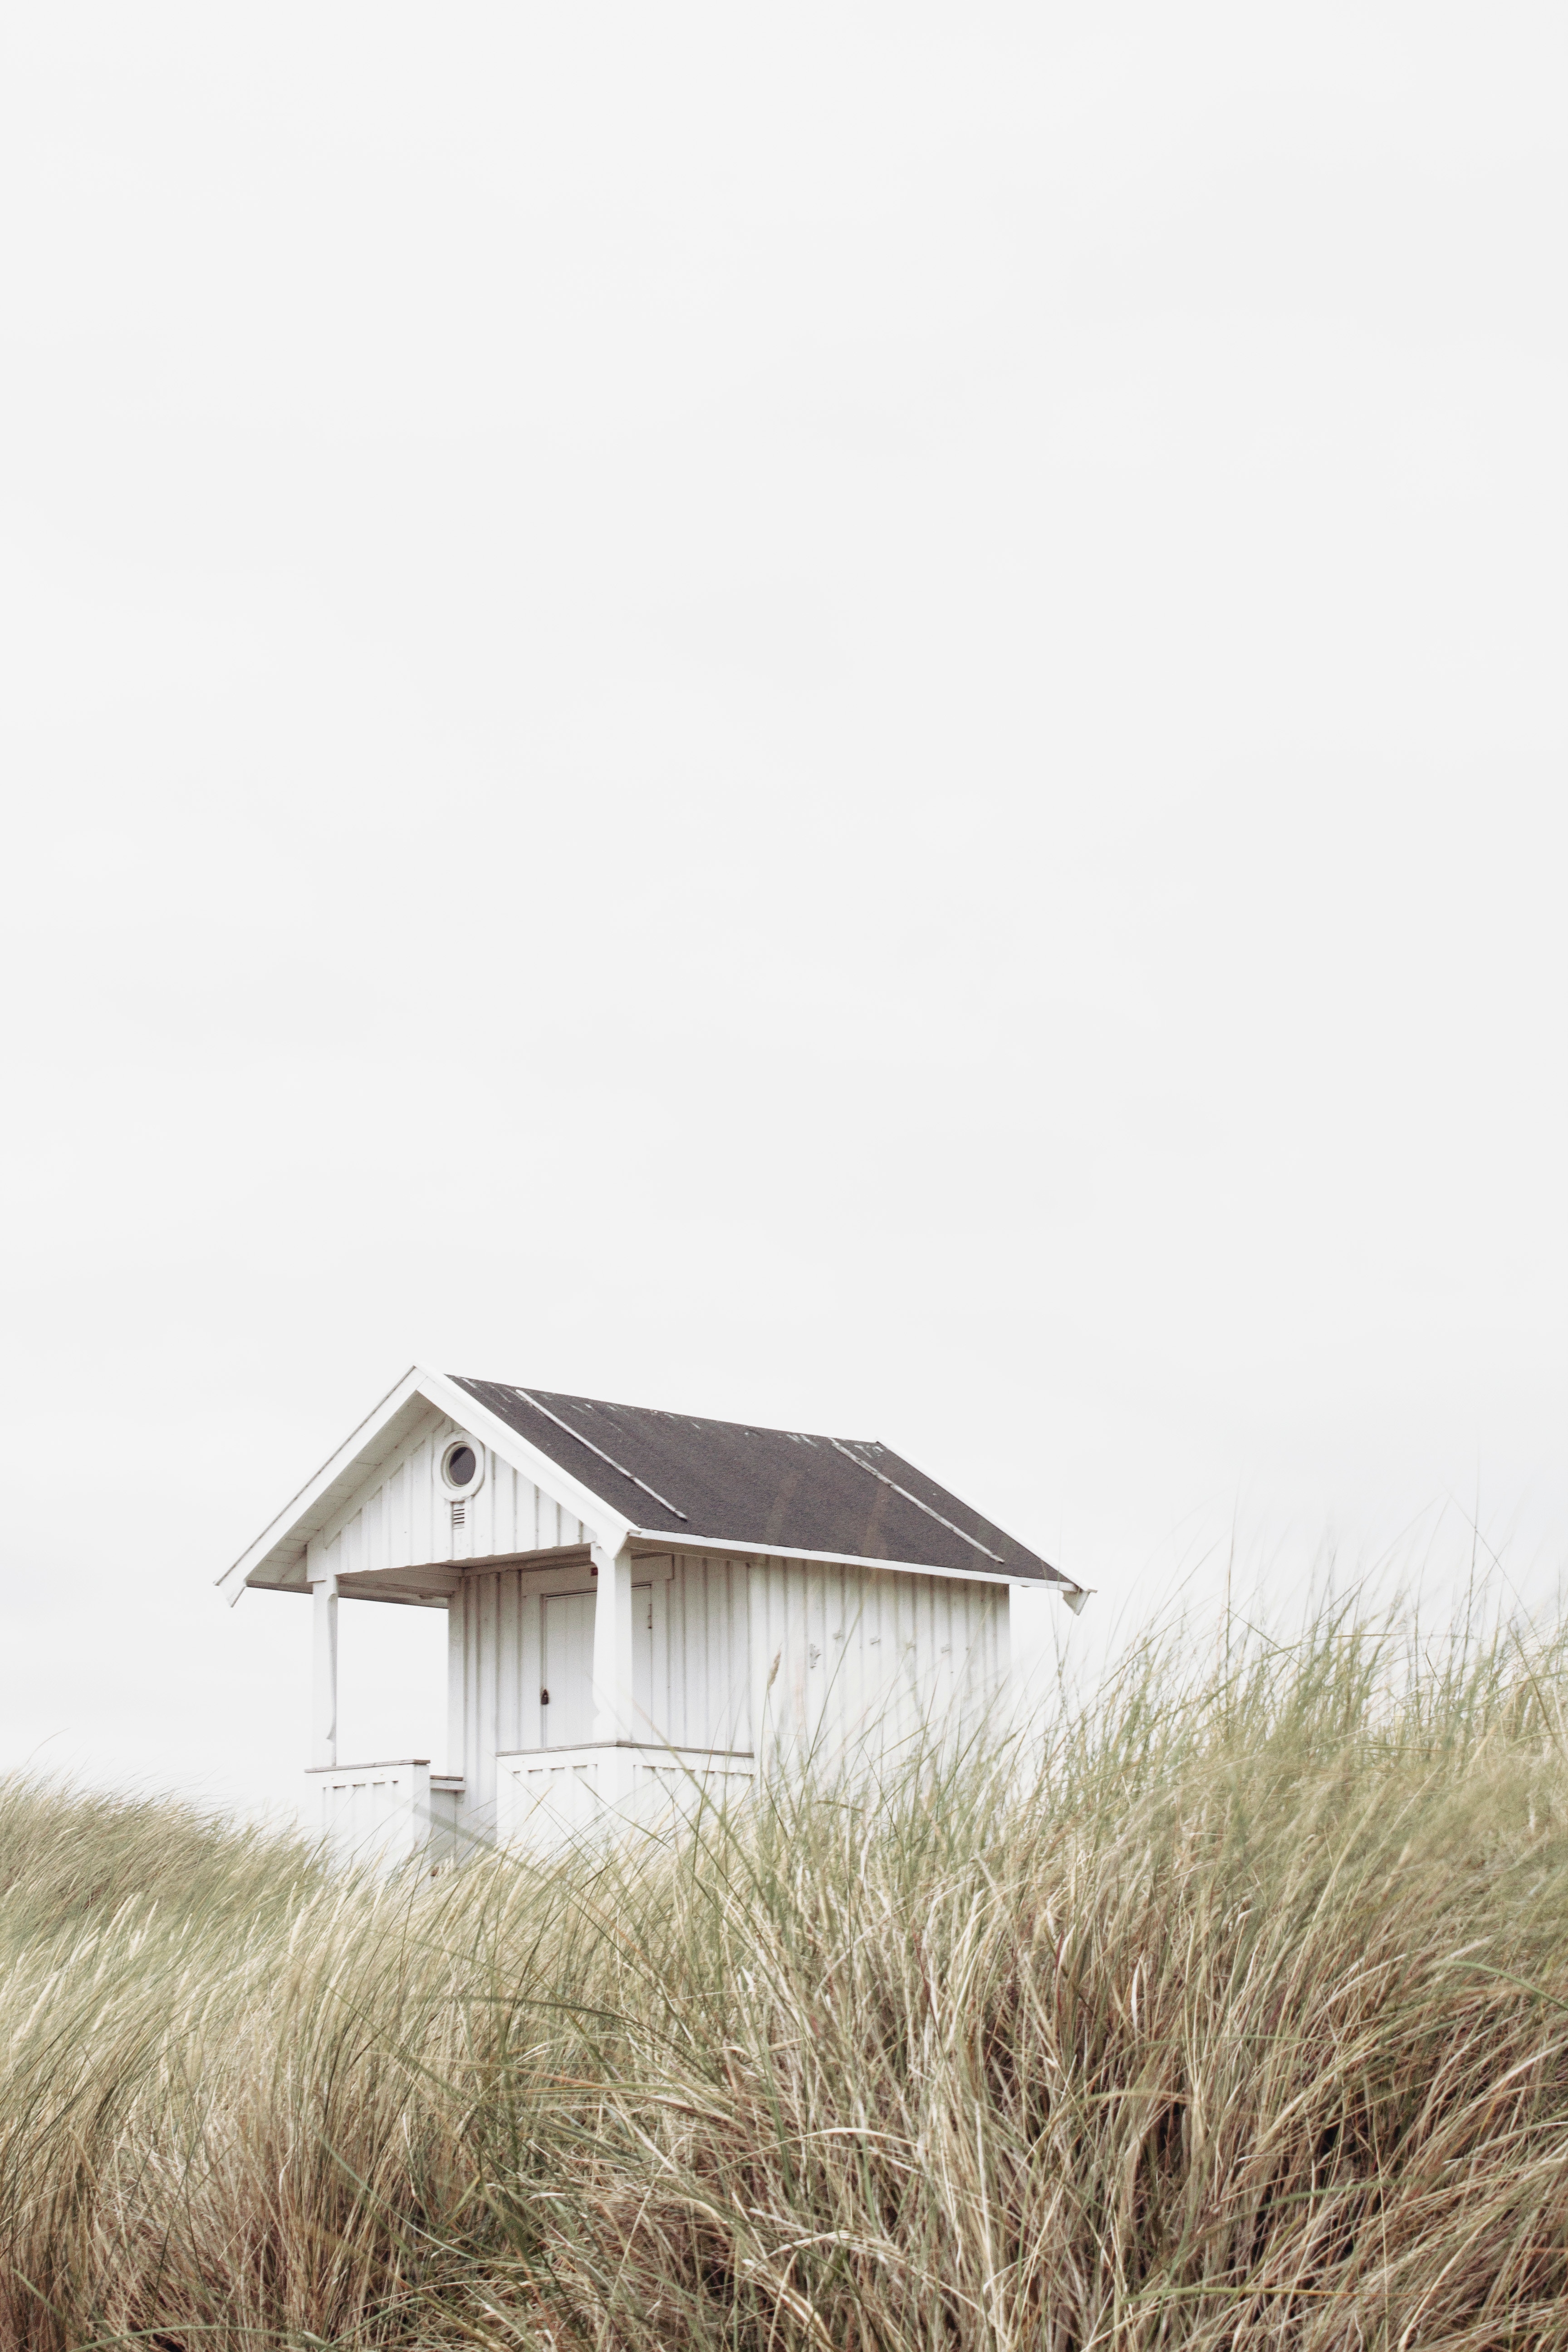 alone, lodge, grass, minimalism, small house, lonely, harmony QHD